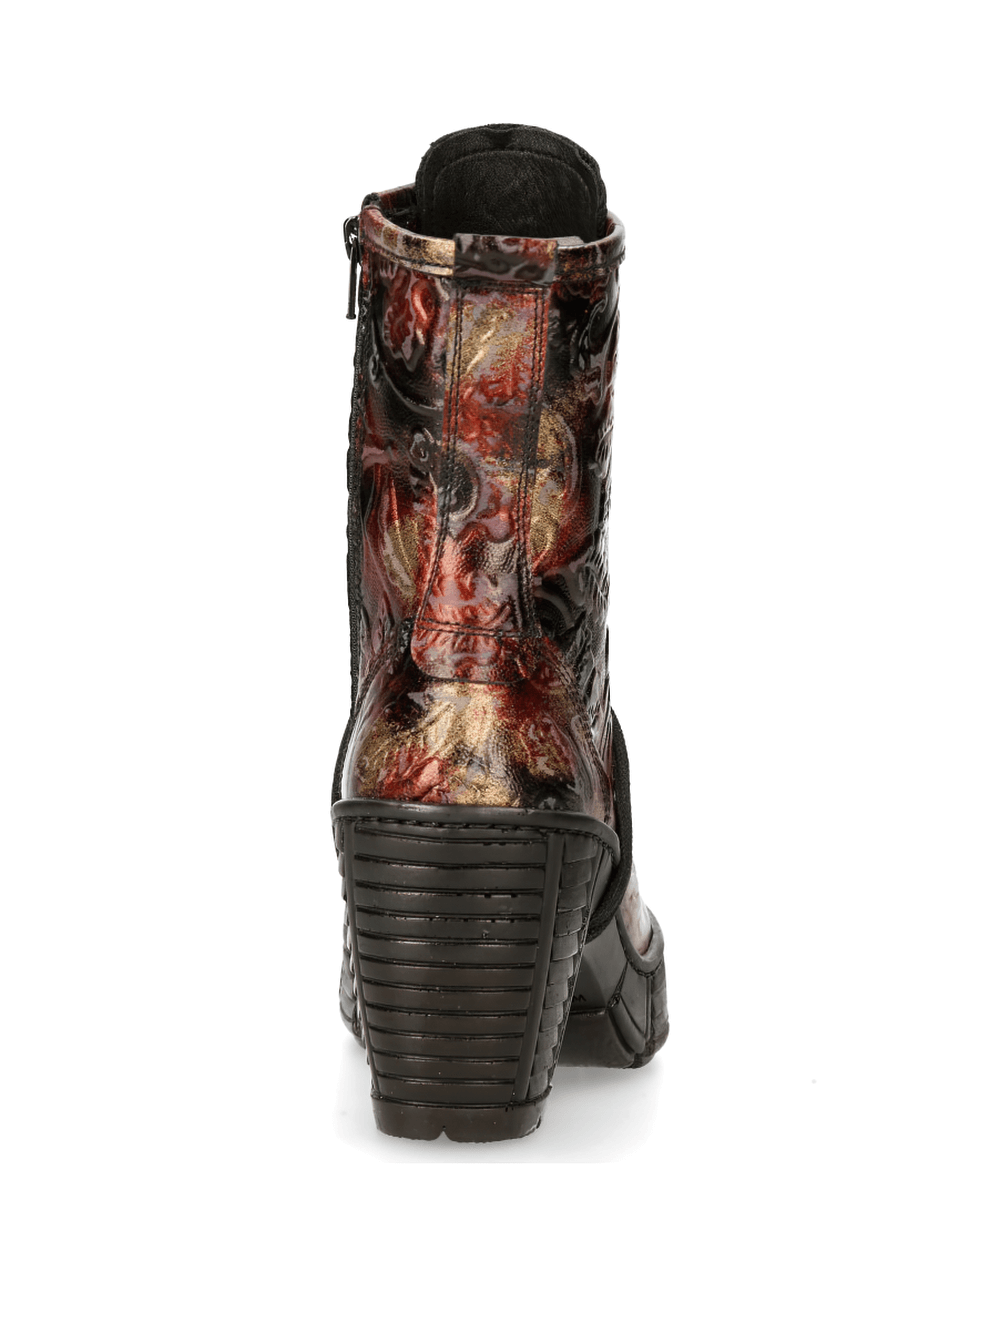 NEW ROCK Gothic Artwork Ankle Boots with Metallic Sheen